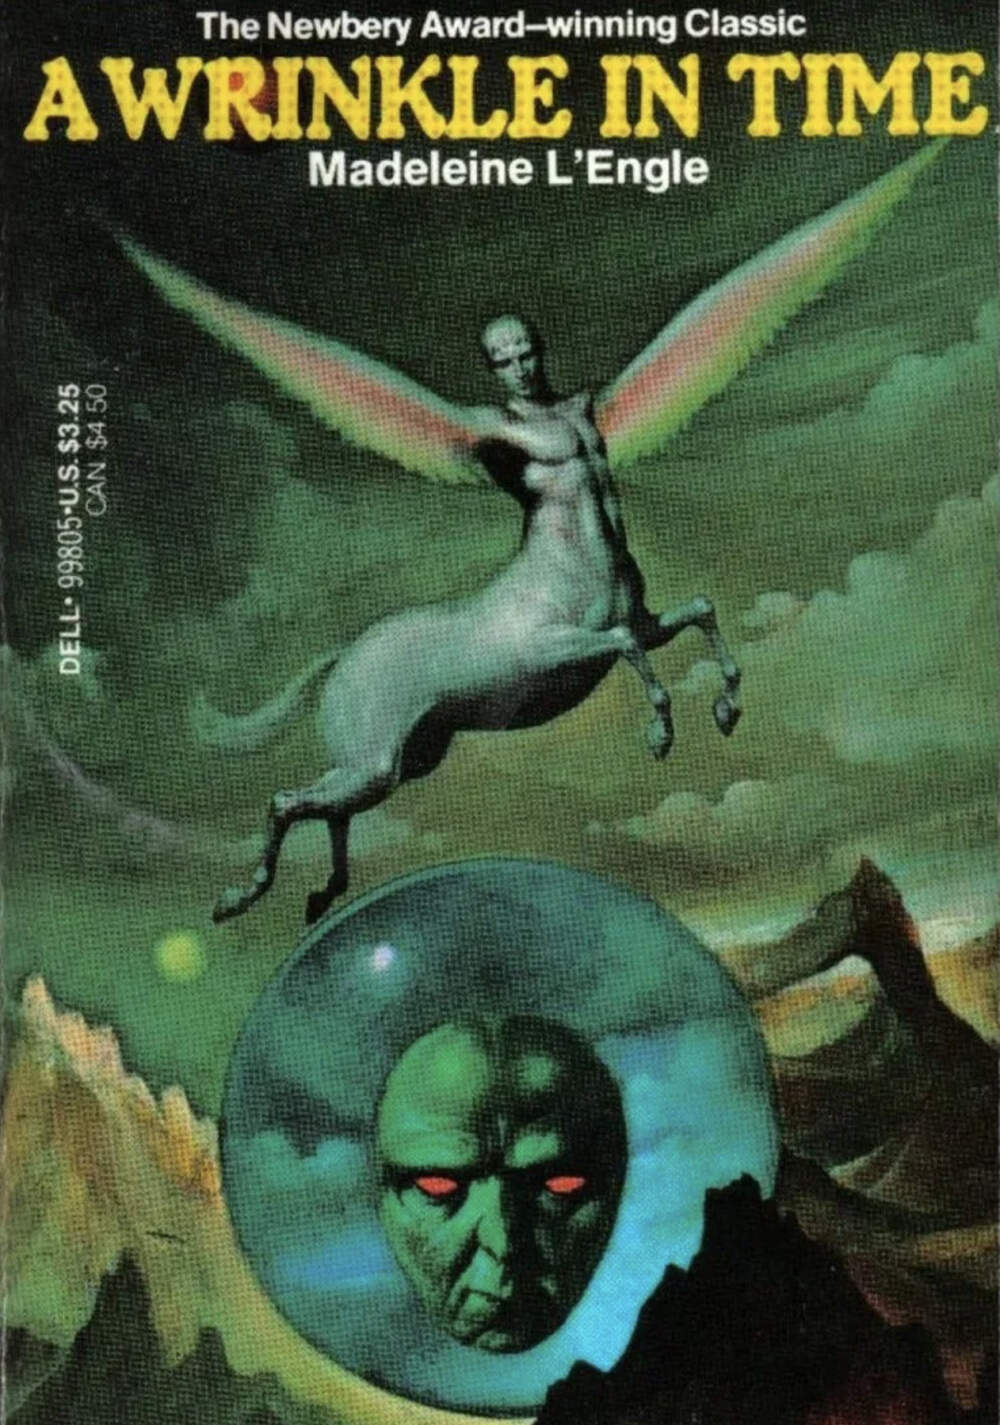 Cover for the 1976 Dell/Laurel Leaf paperback edition of &quot;A Wrinkle in Time.&quot;